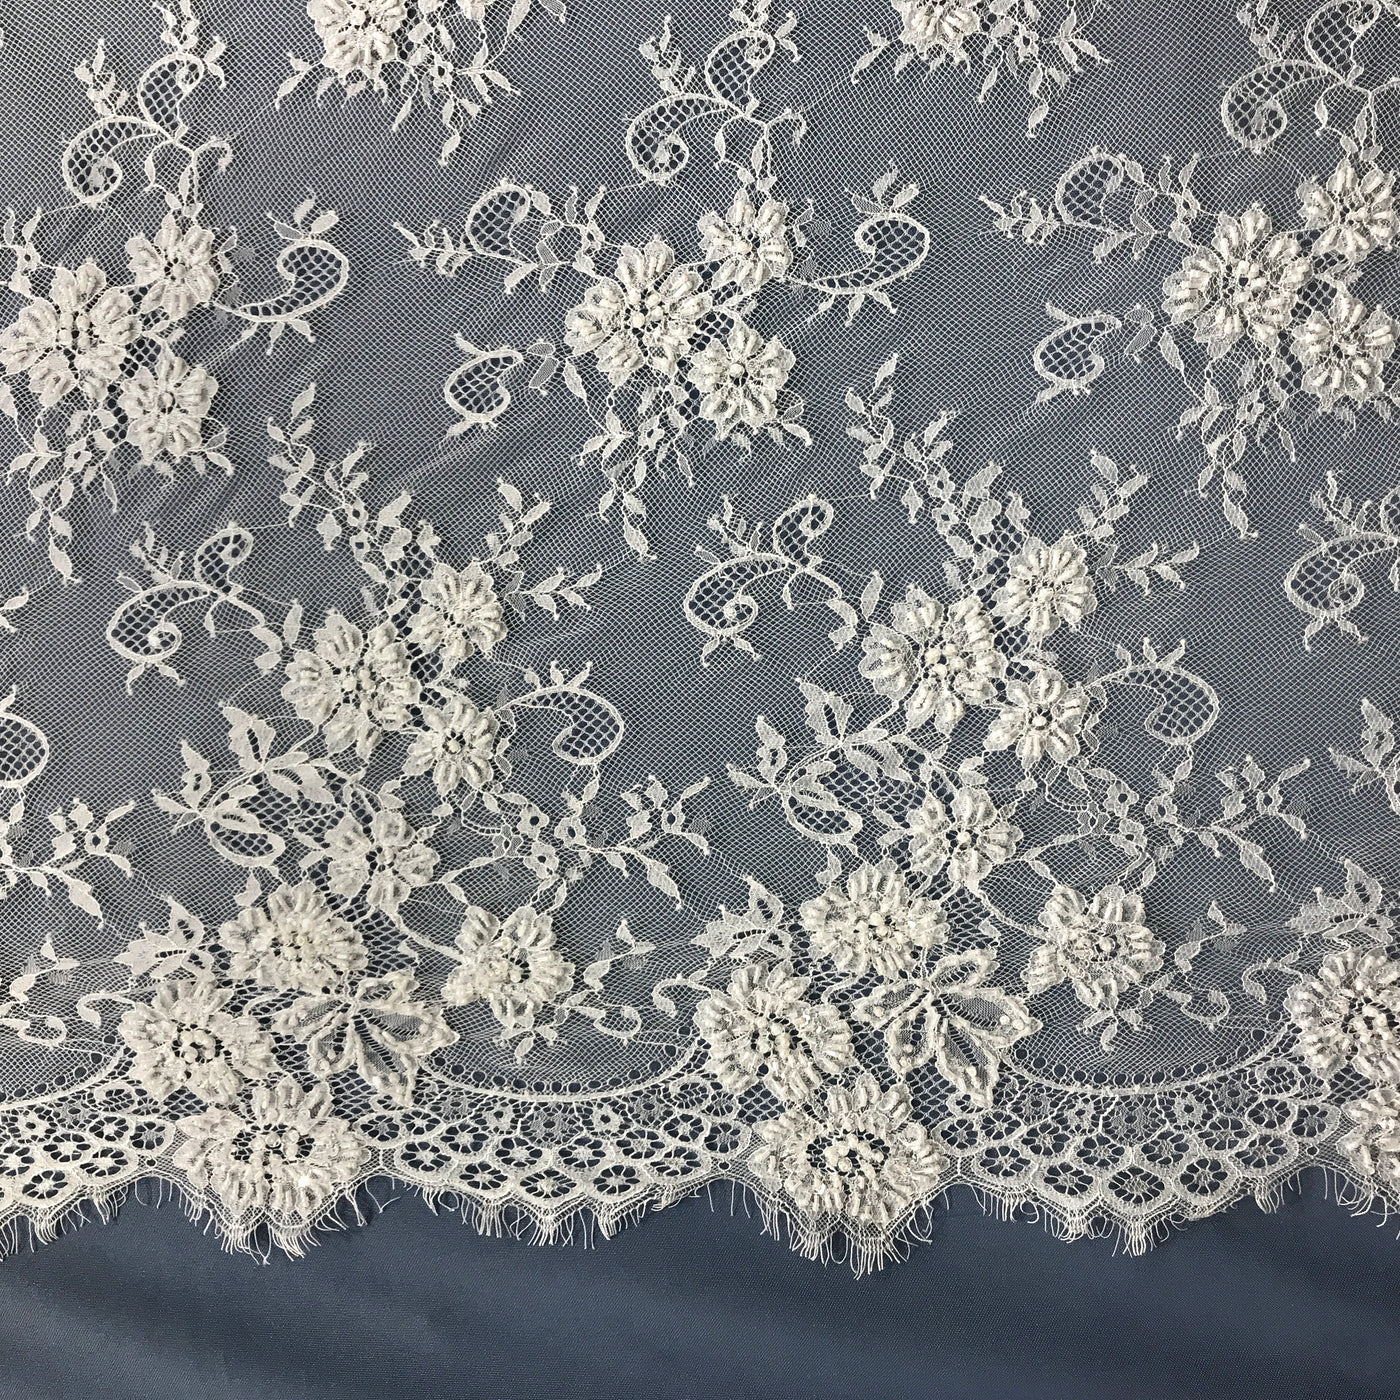 Beaded Chantilly Embroidered Lace Fabric with Eyelash Scallop | Lace USA - 68125W-BP